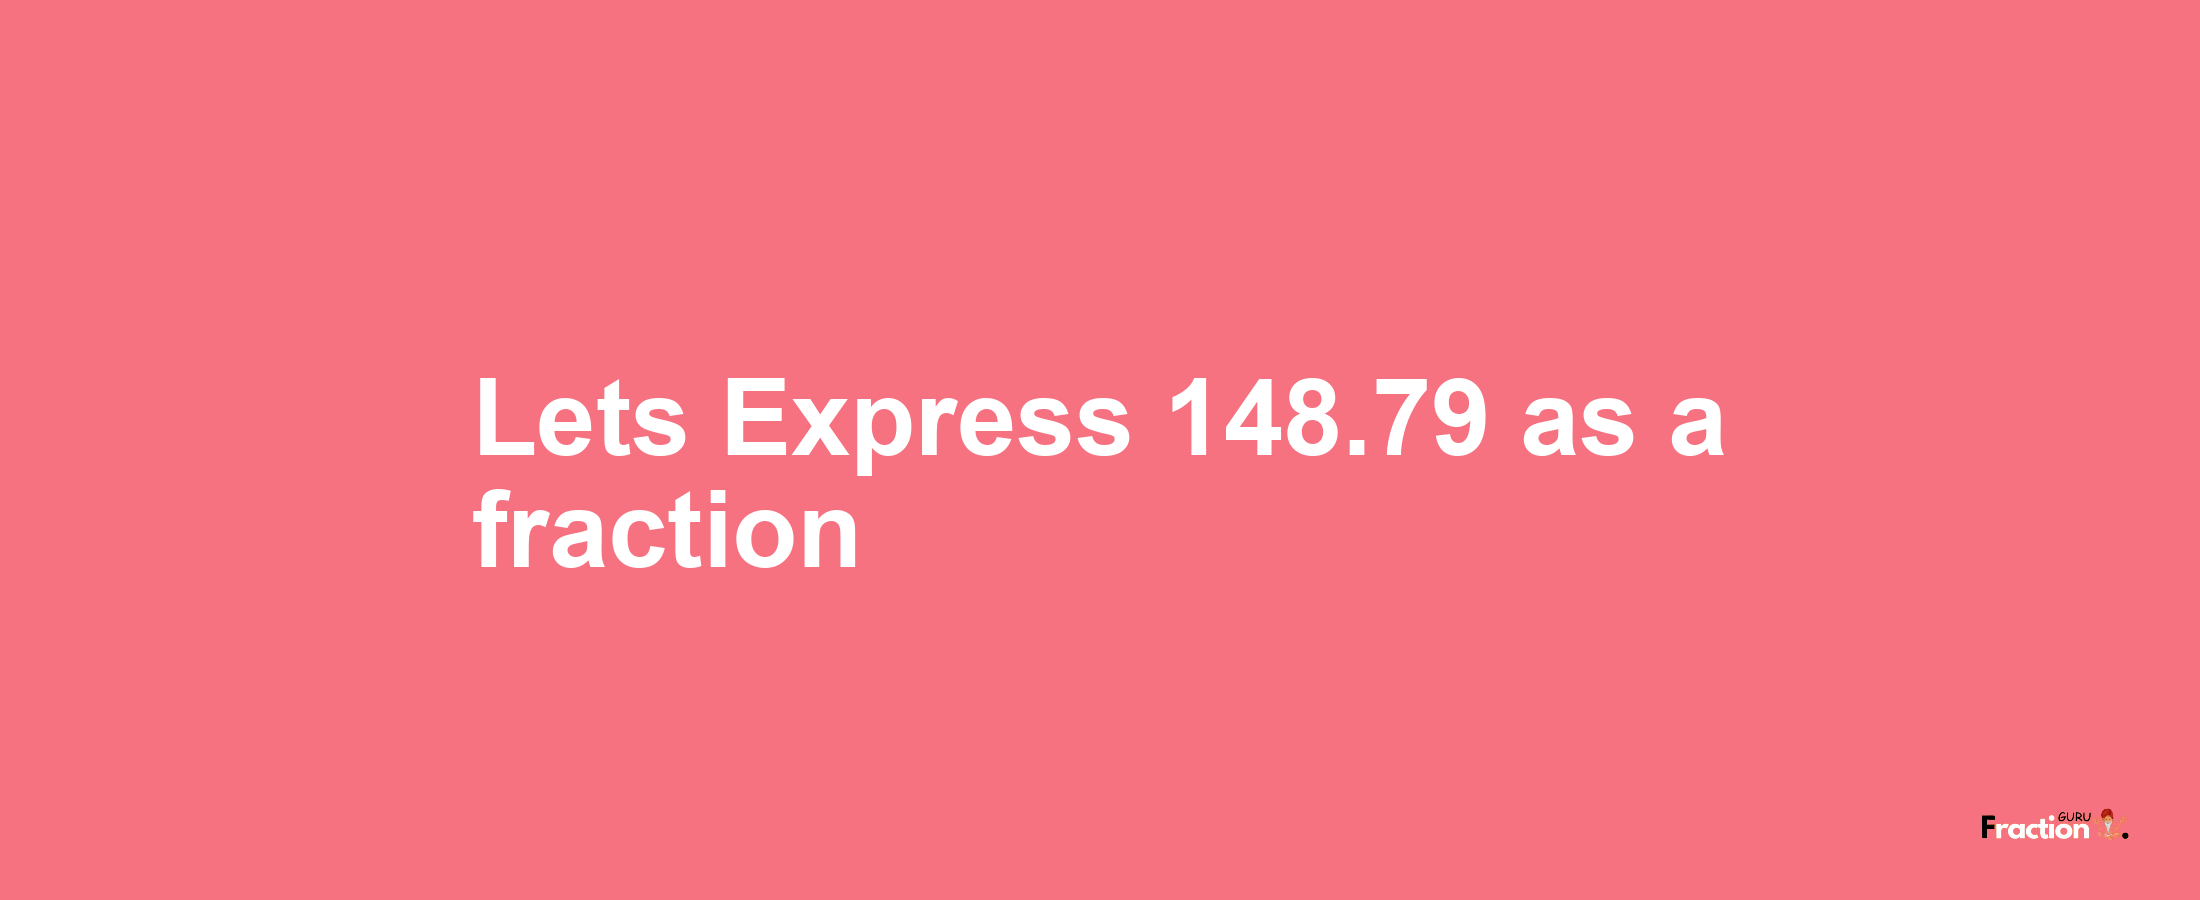 Lets Express 148.79 as afraction